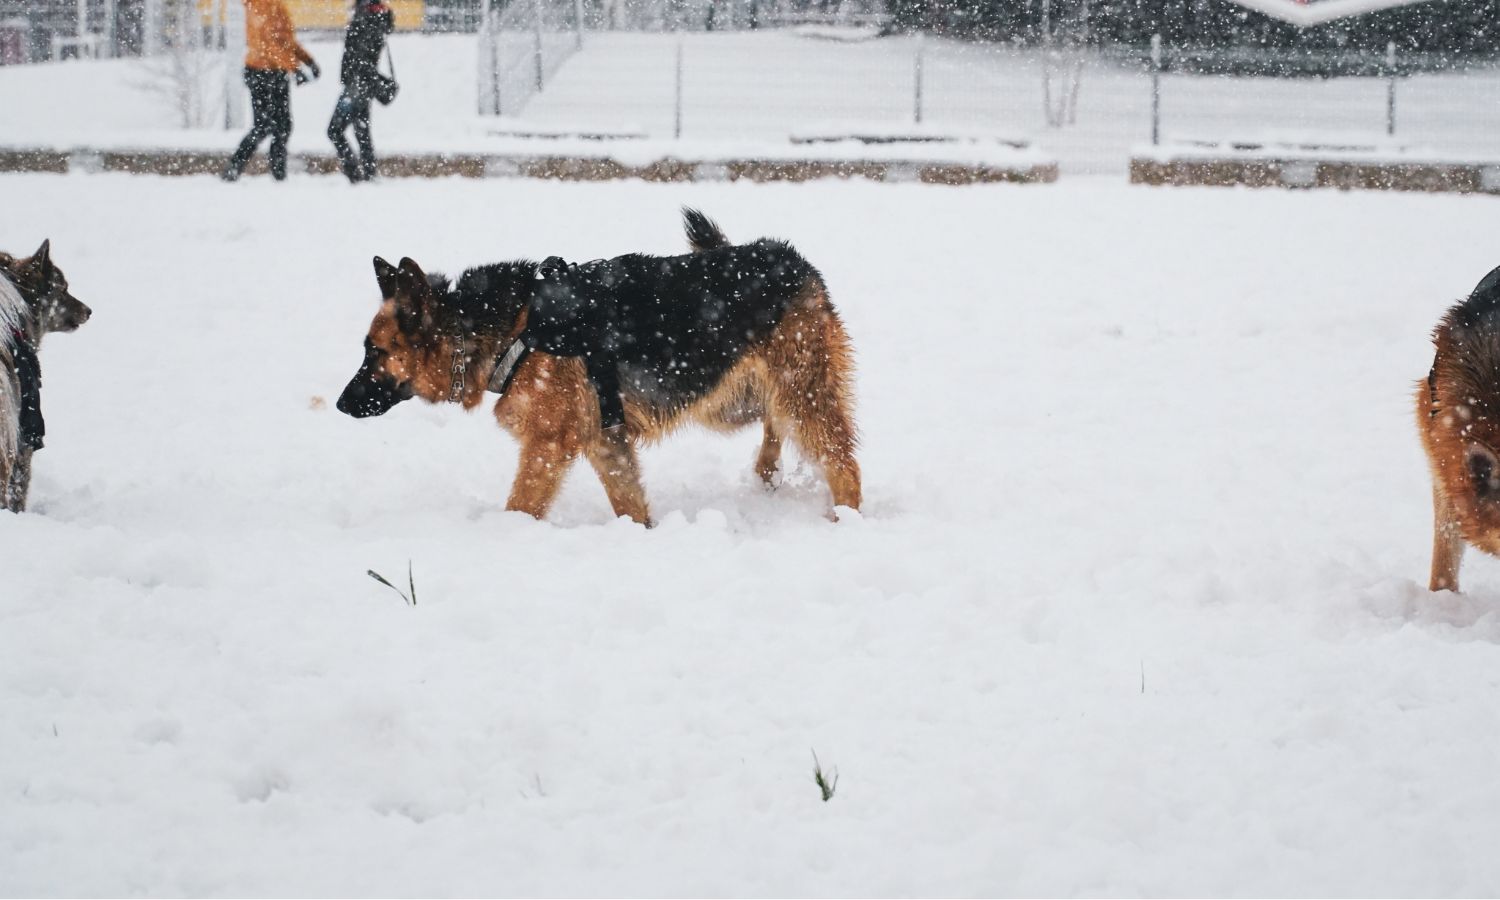 Dogs in snow (1)